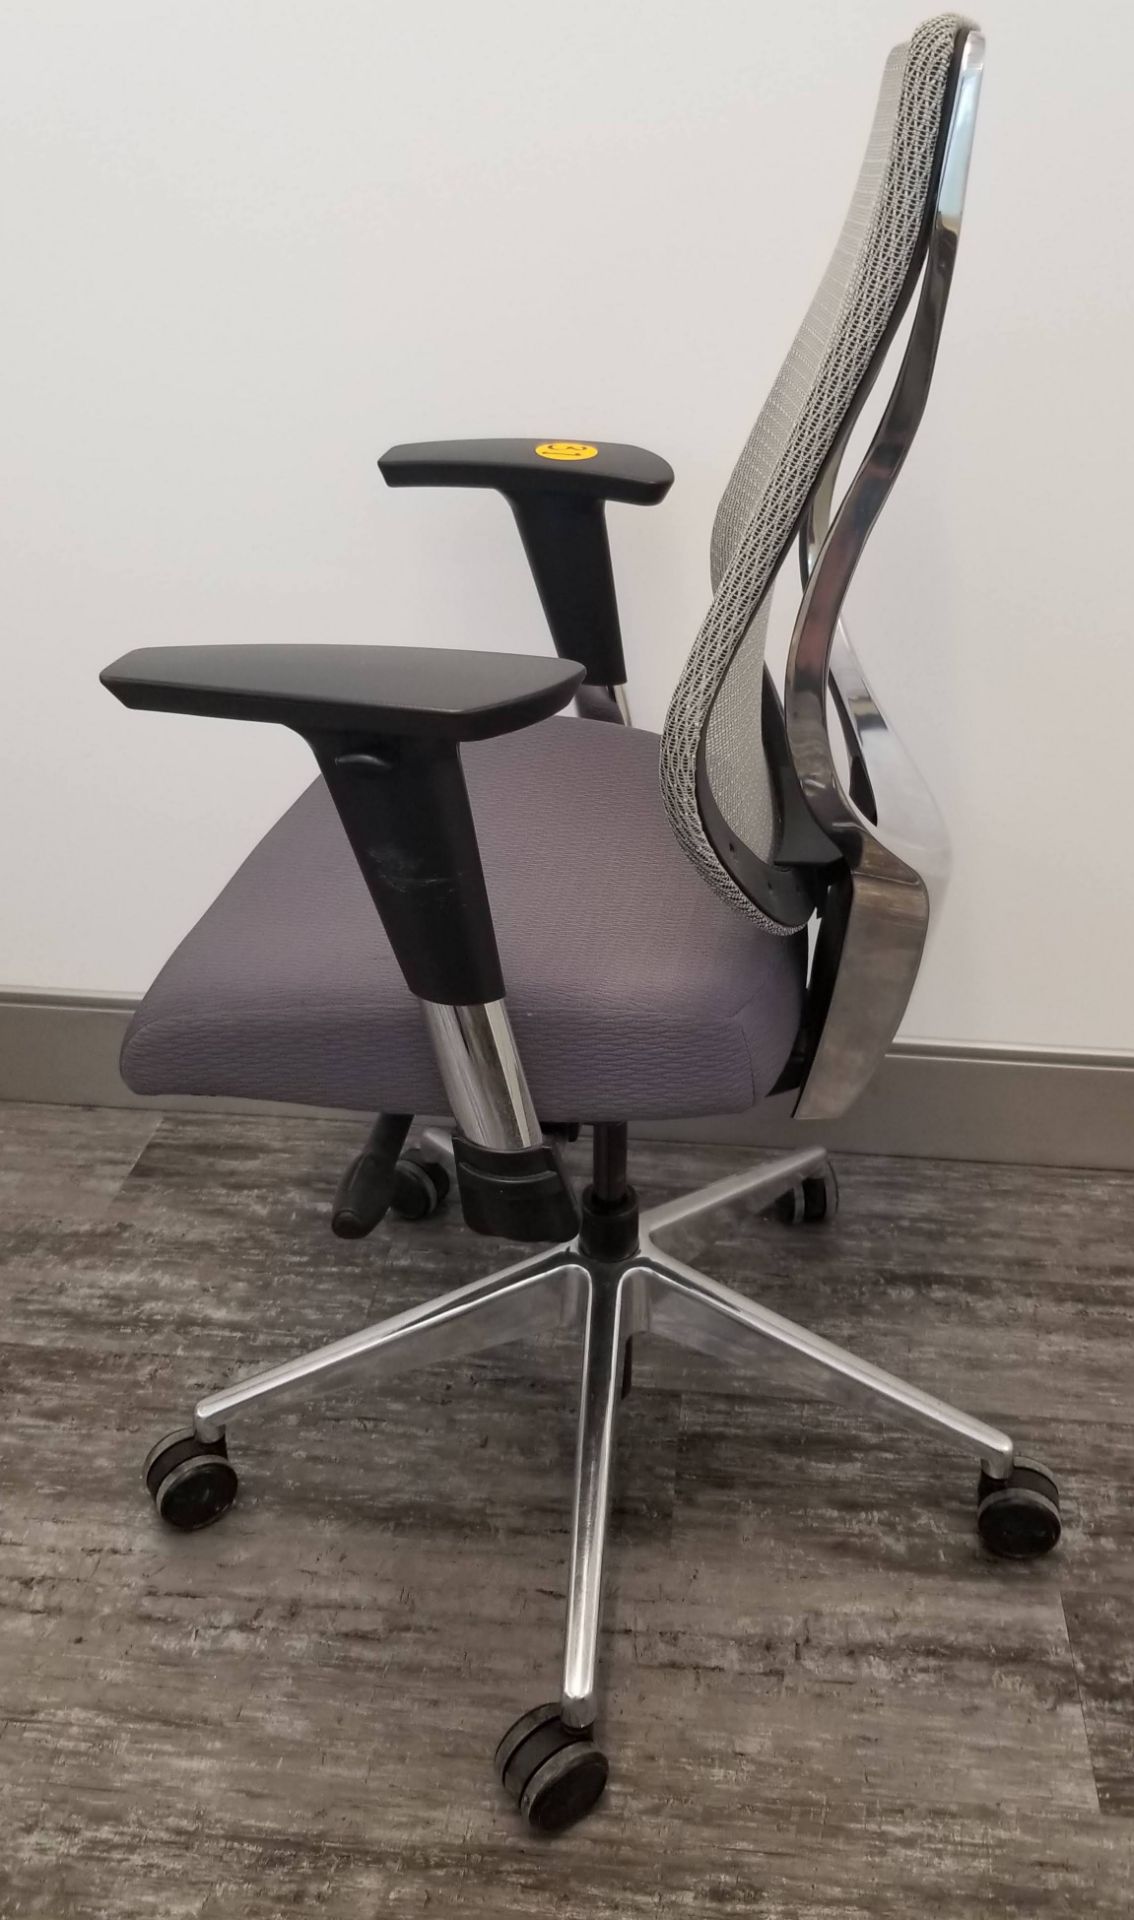 ALLSEATING - EXEC. CHAIR ON CASTERS, GREY W/ MESH BACK, ADJUSTABLE HEIGHT, ADJUSTABLE ARMS - Image 2 of 7